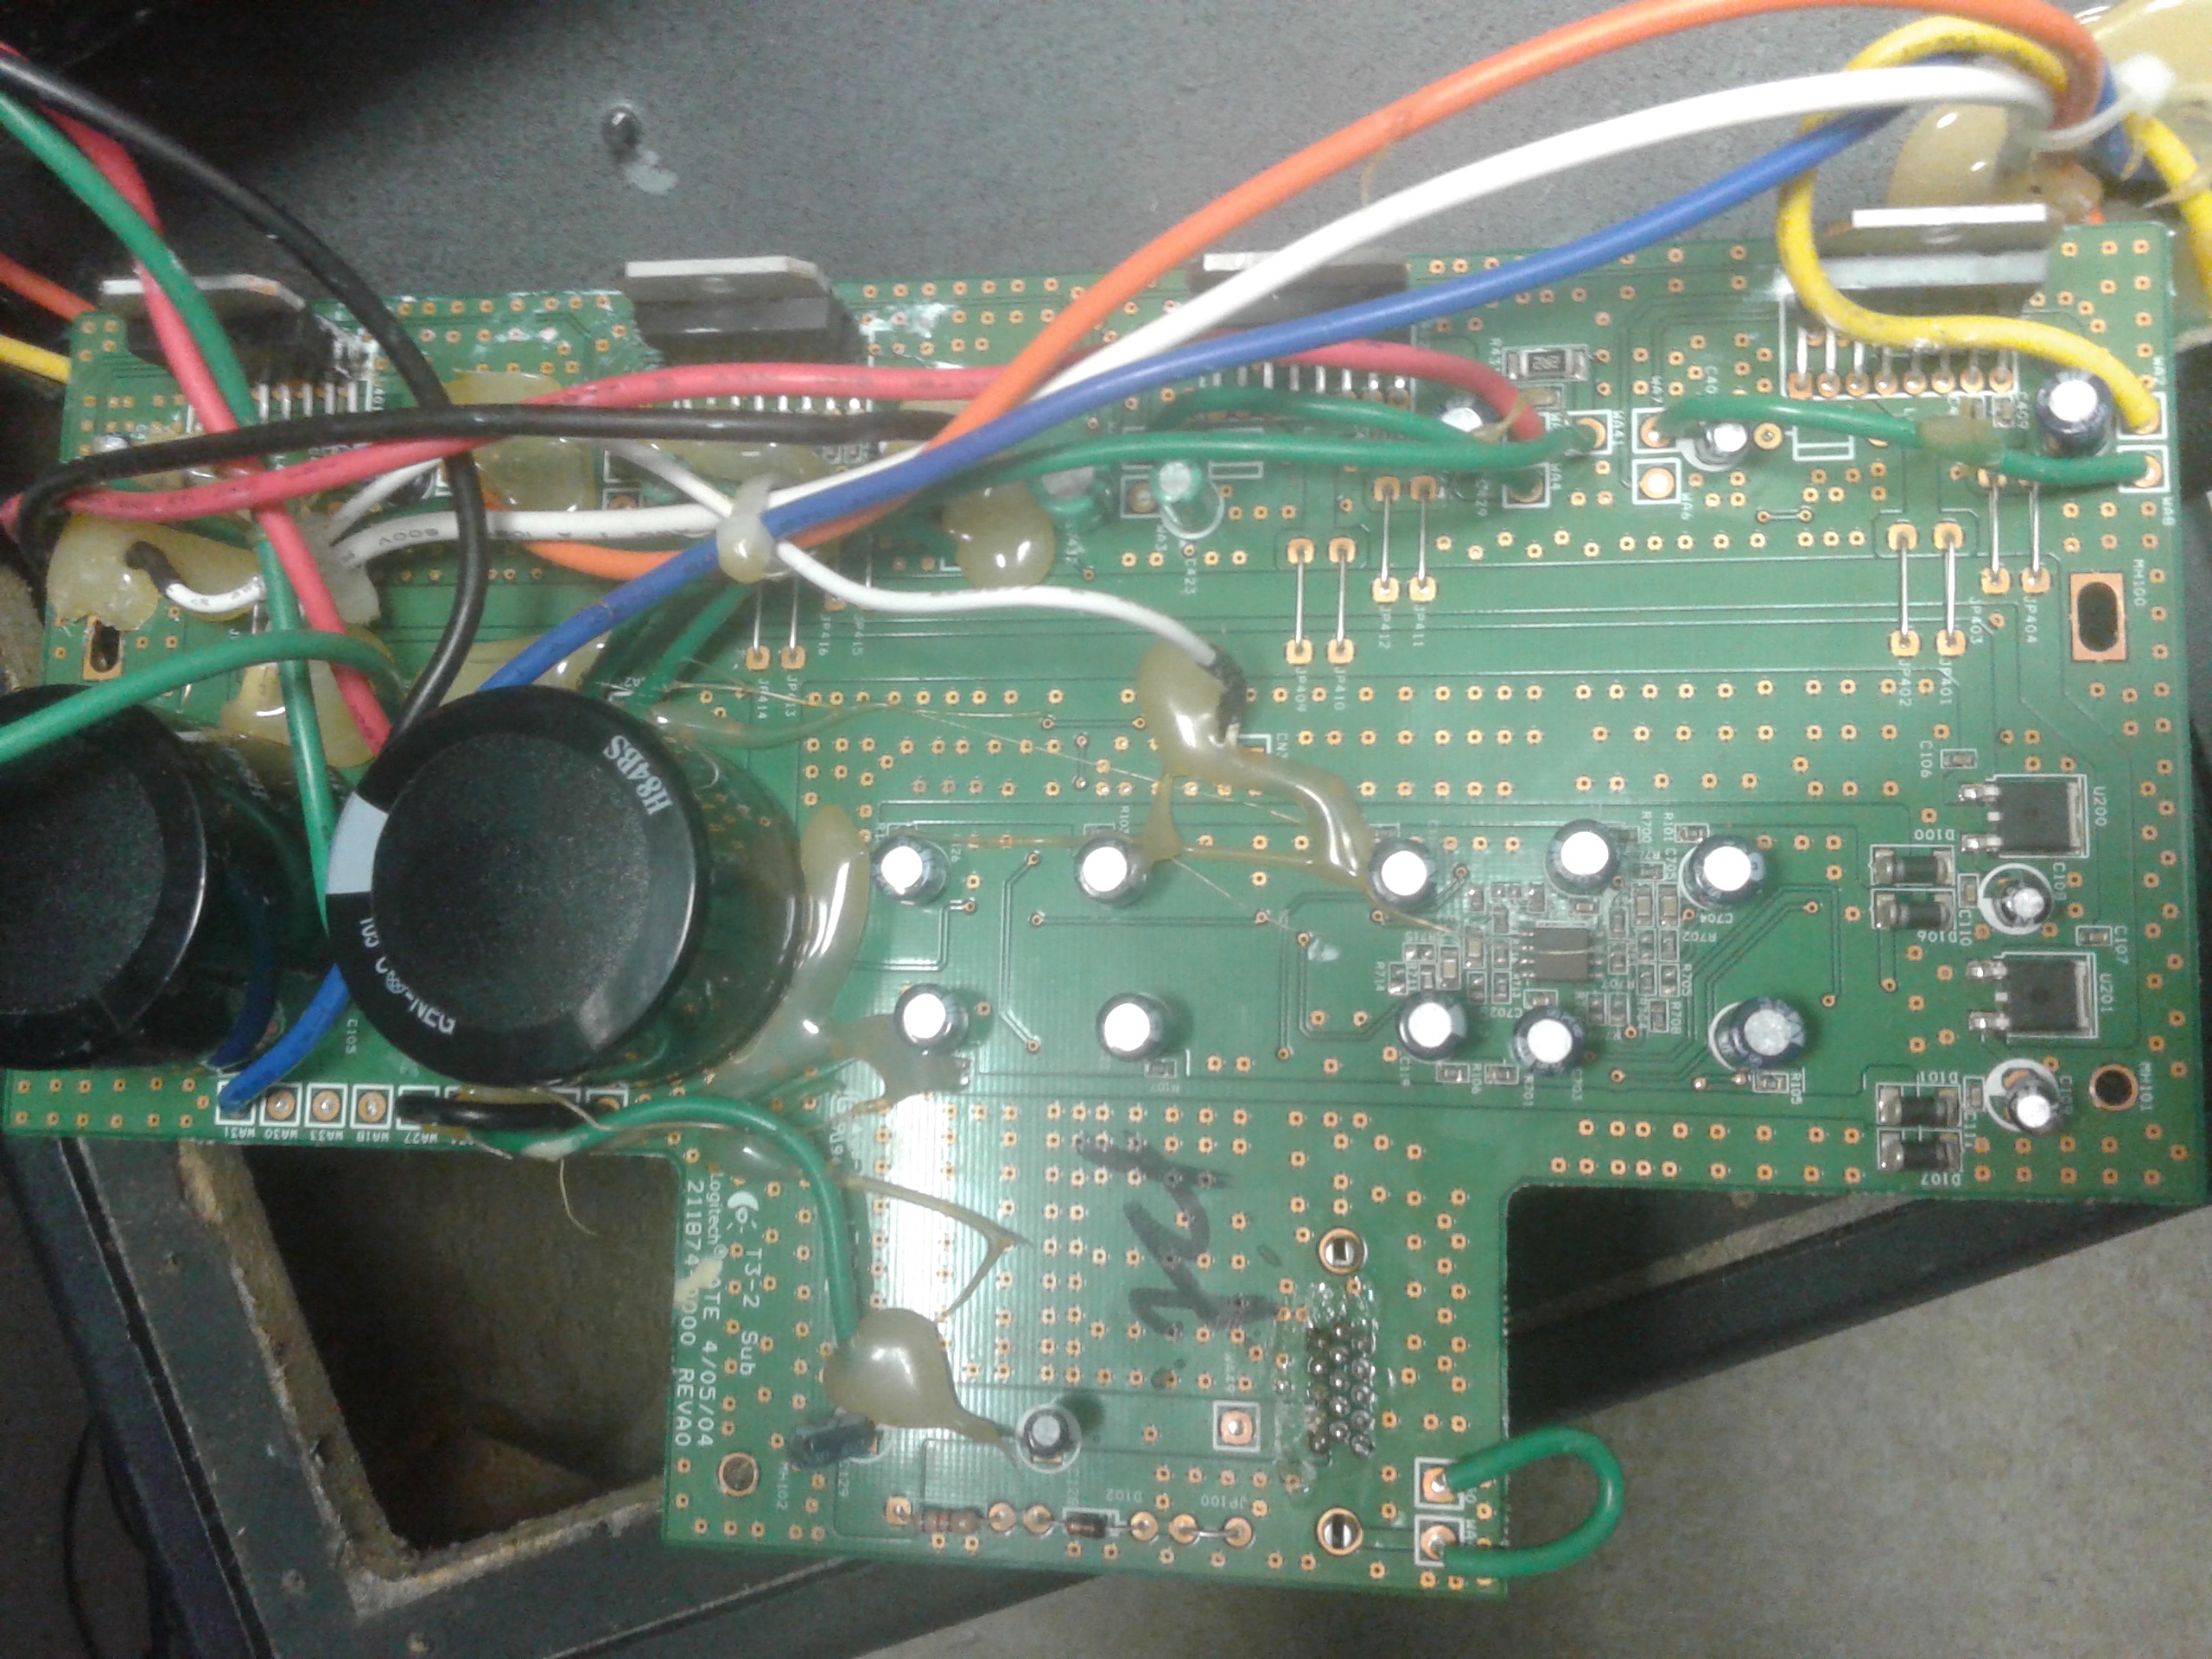 Fern Traktat udledning Need help on Logitech Z-2300 | Electronics Forum (Circuits, Projects and  Microcontrollers)